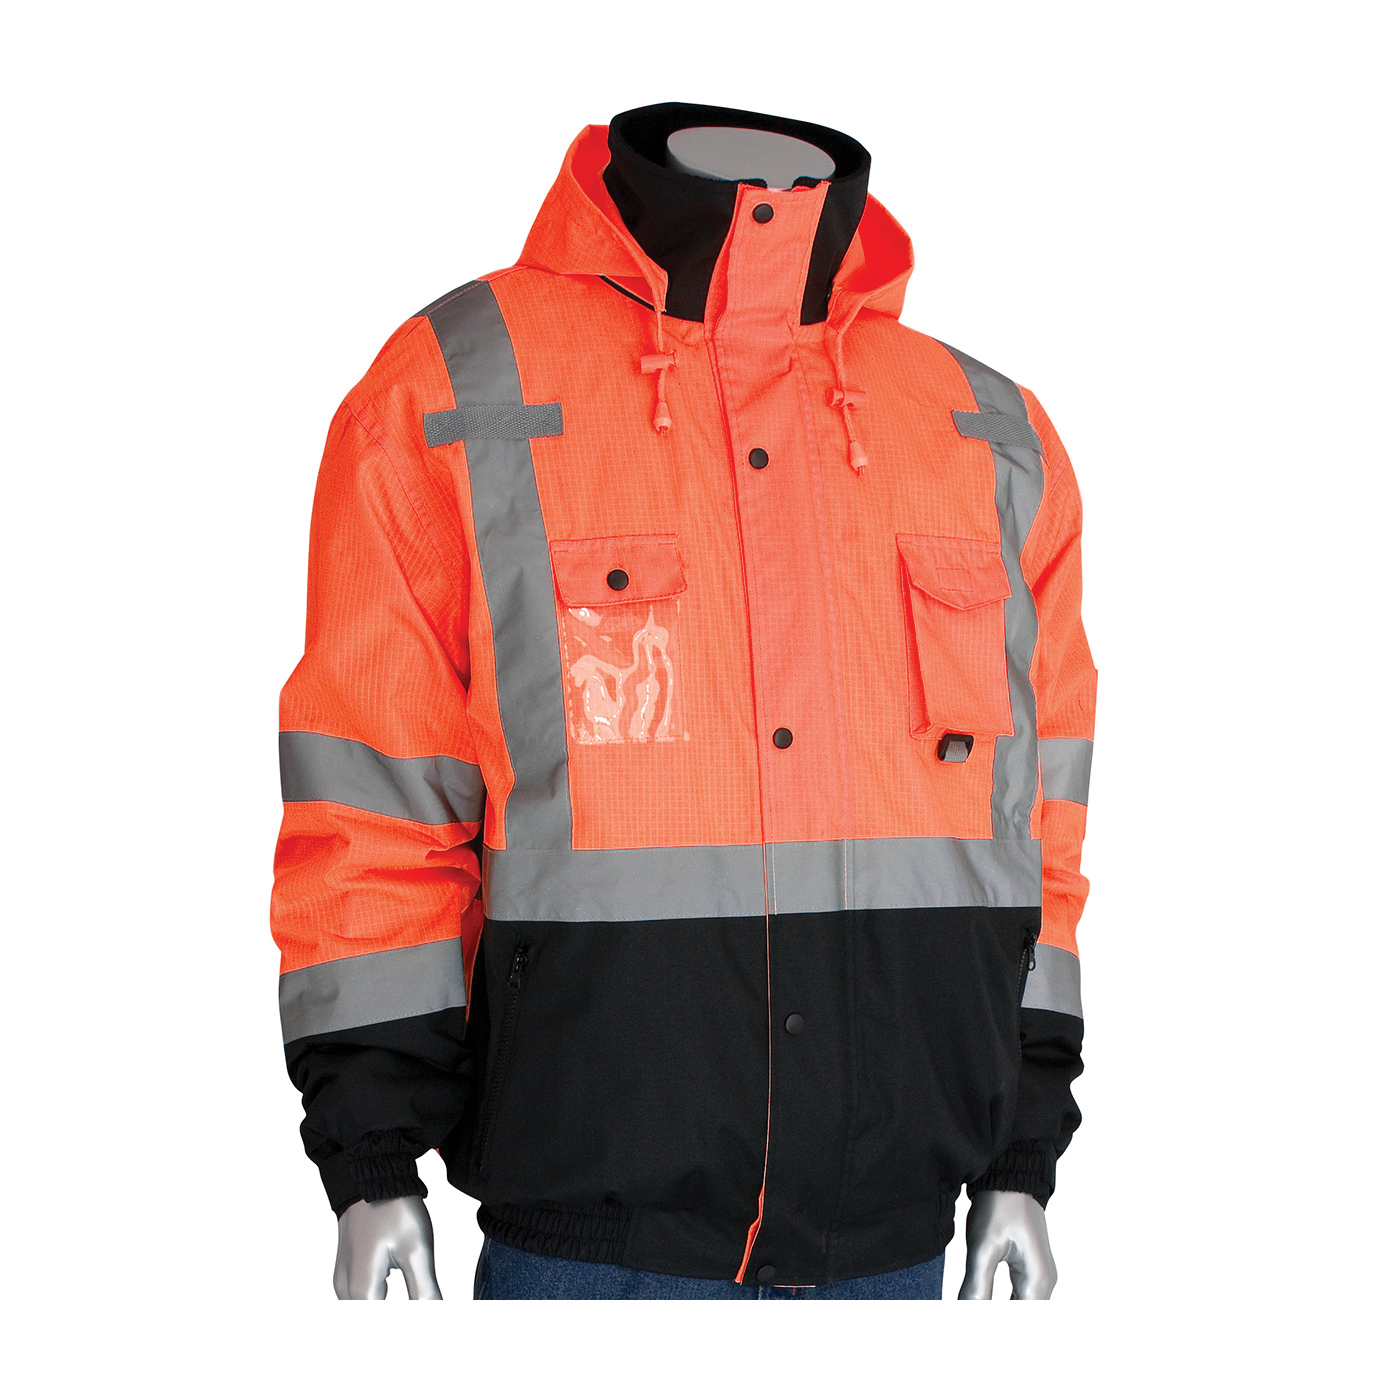 PIP® 333-1770-OR/3X Bomber Jacket With Zip-Out Fleece Liner, Hi-Viz Orange, Polyester, 66 in Chest, Resists: Water, Specifications Met: ANSI 107 Class 3 Type R